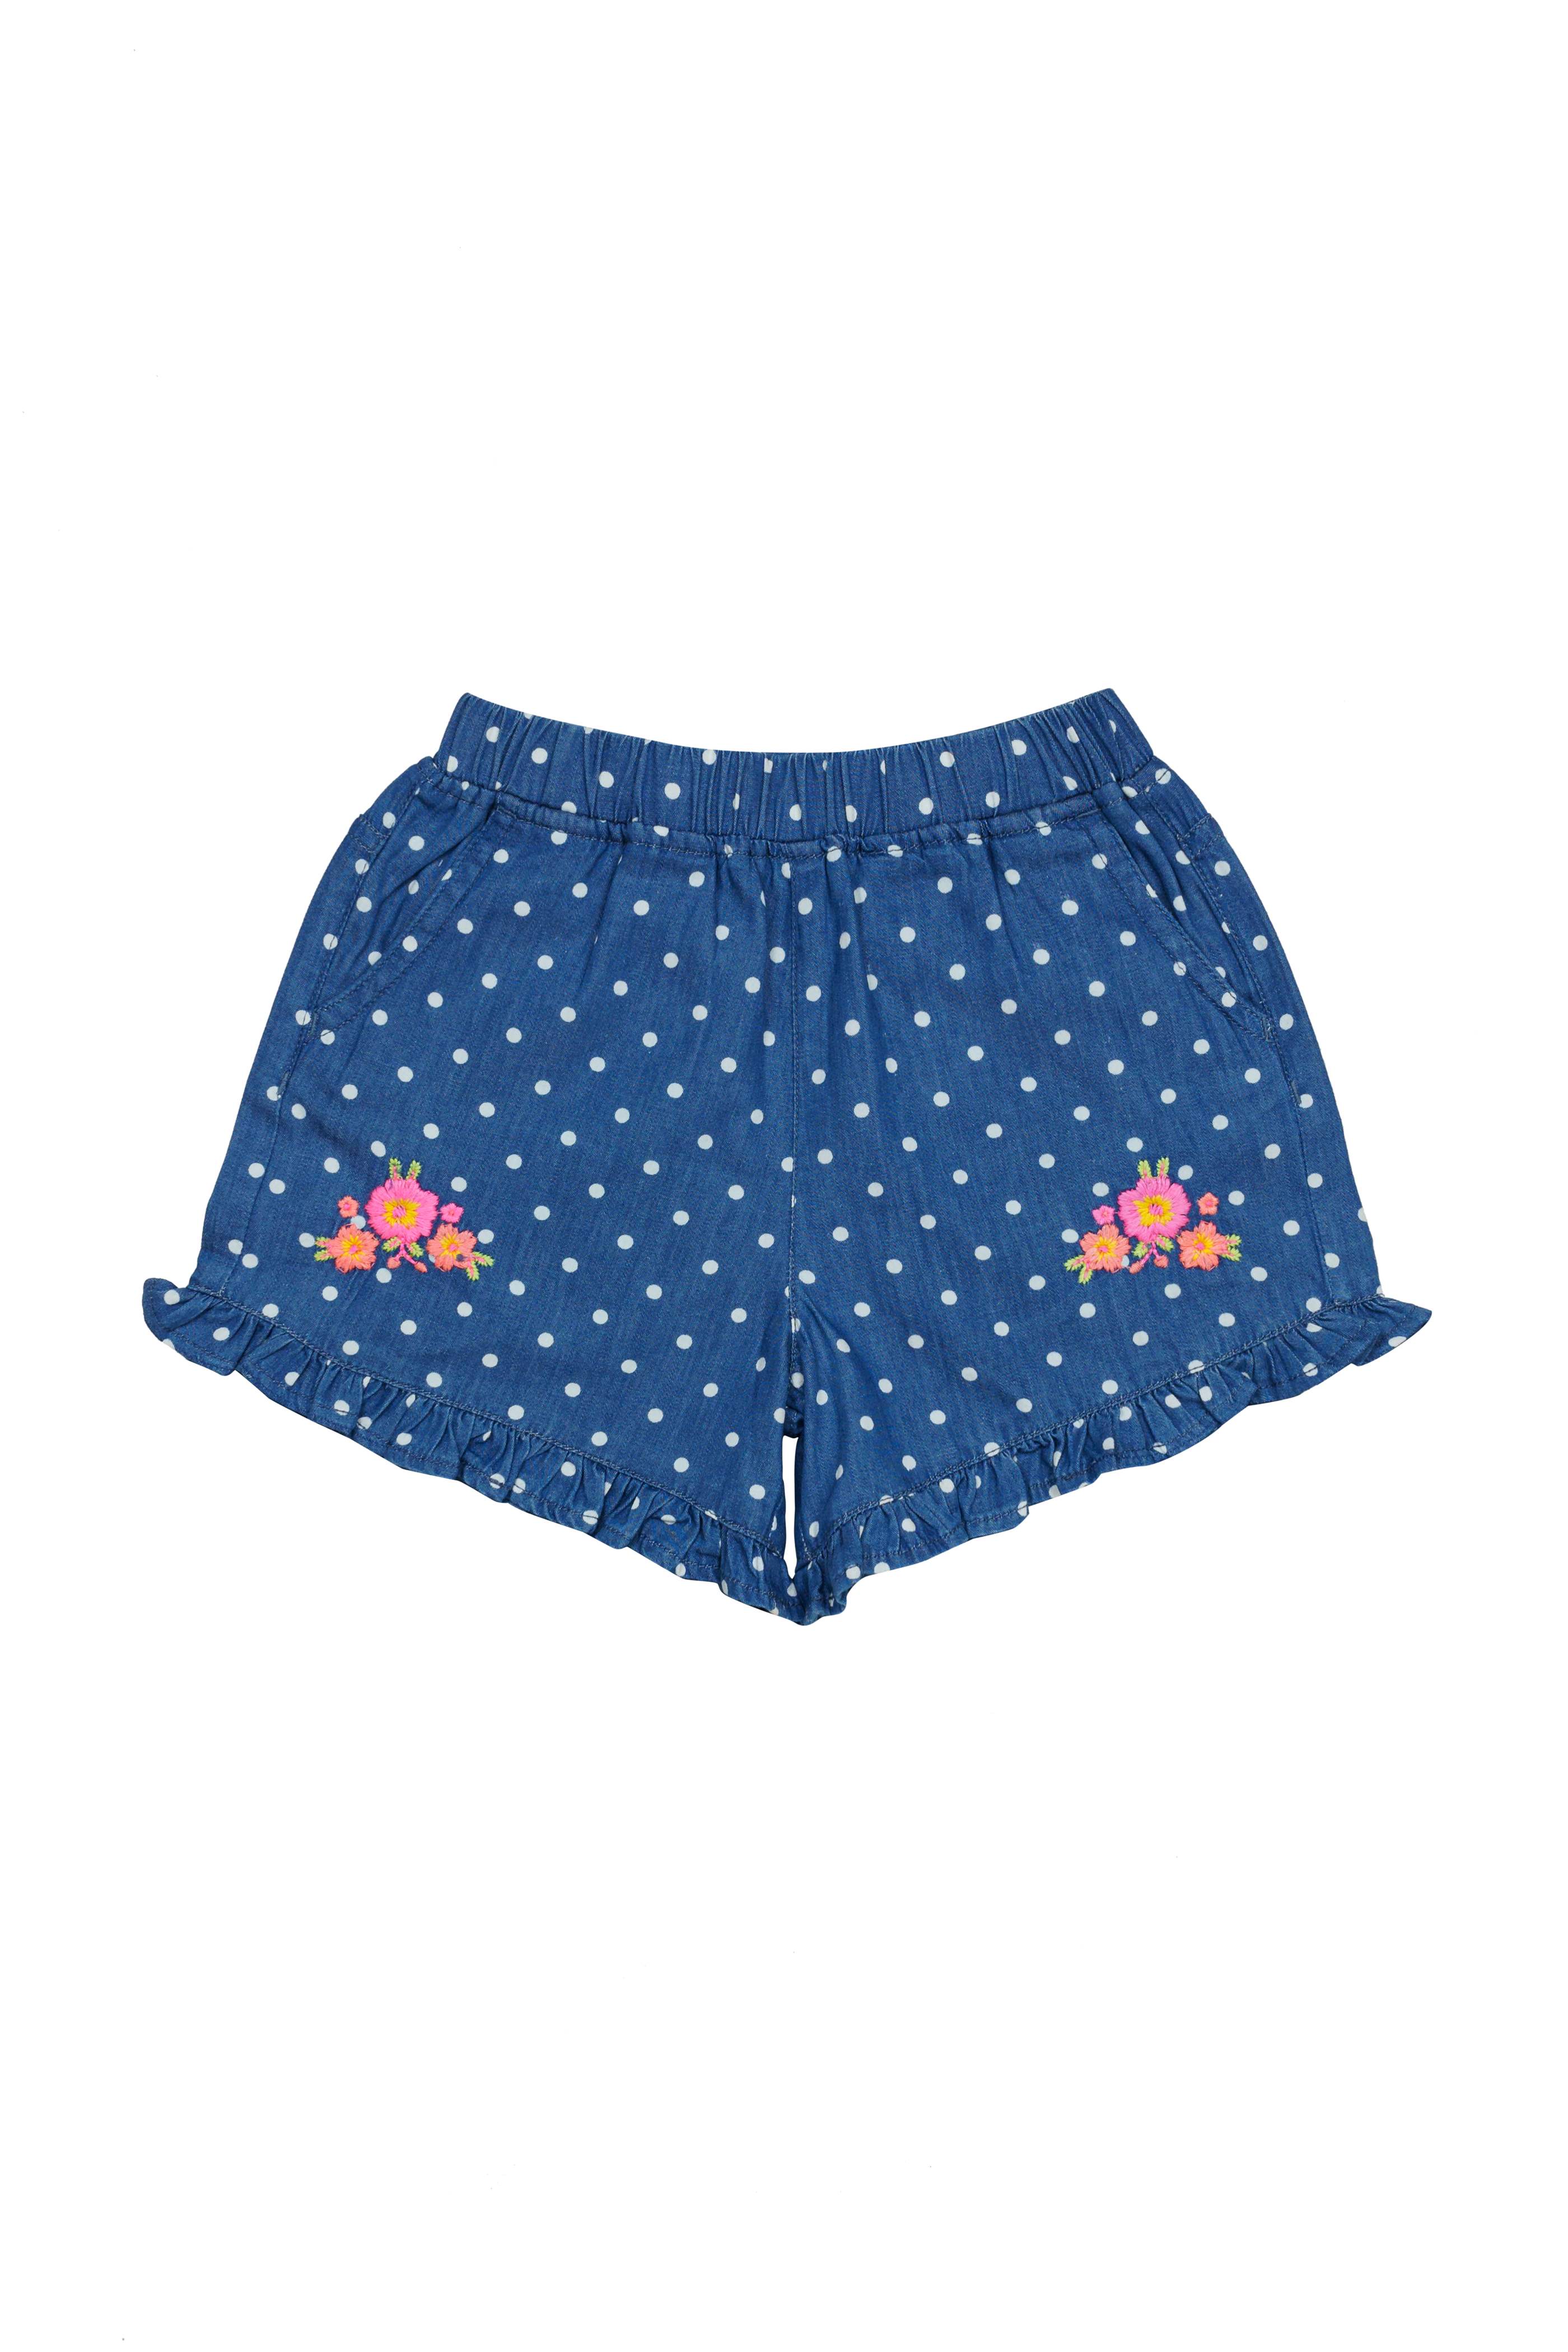 H by Hamleys Girls Embroidered Blue Shorts